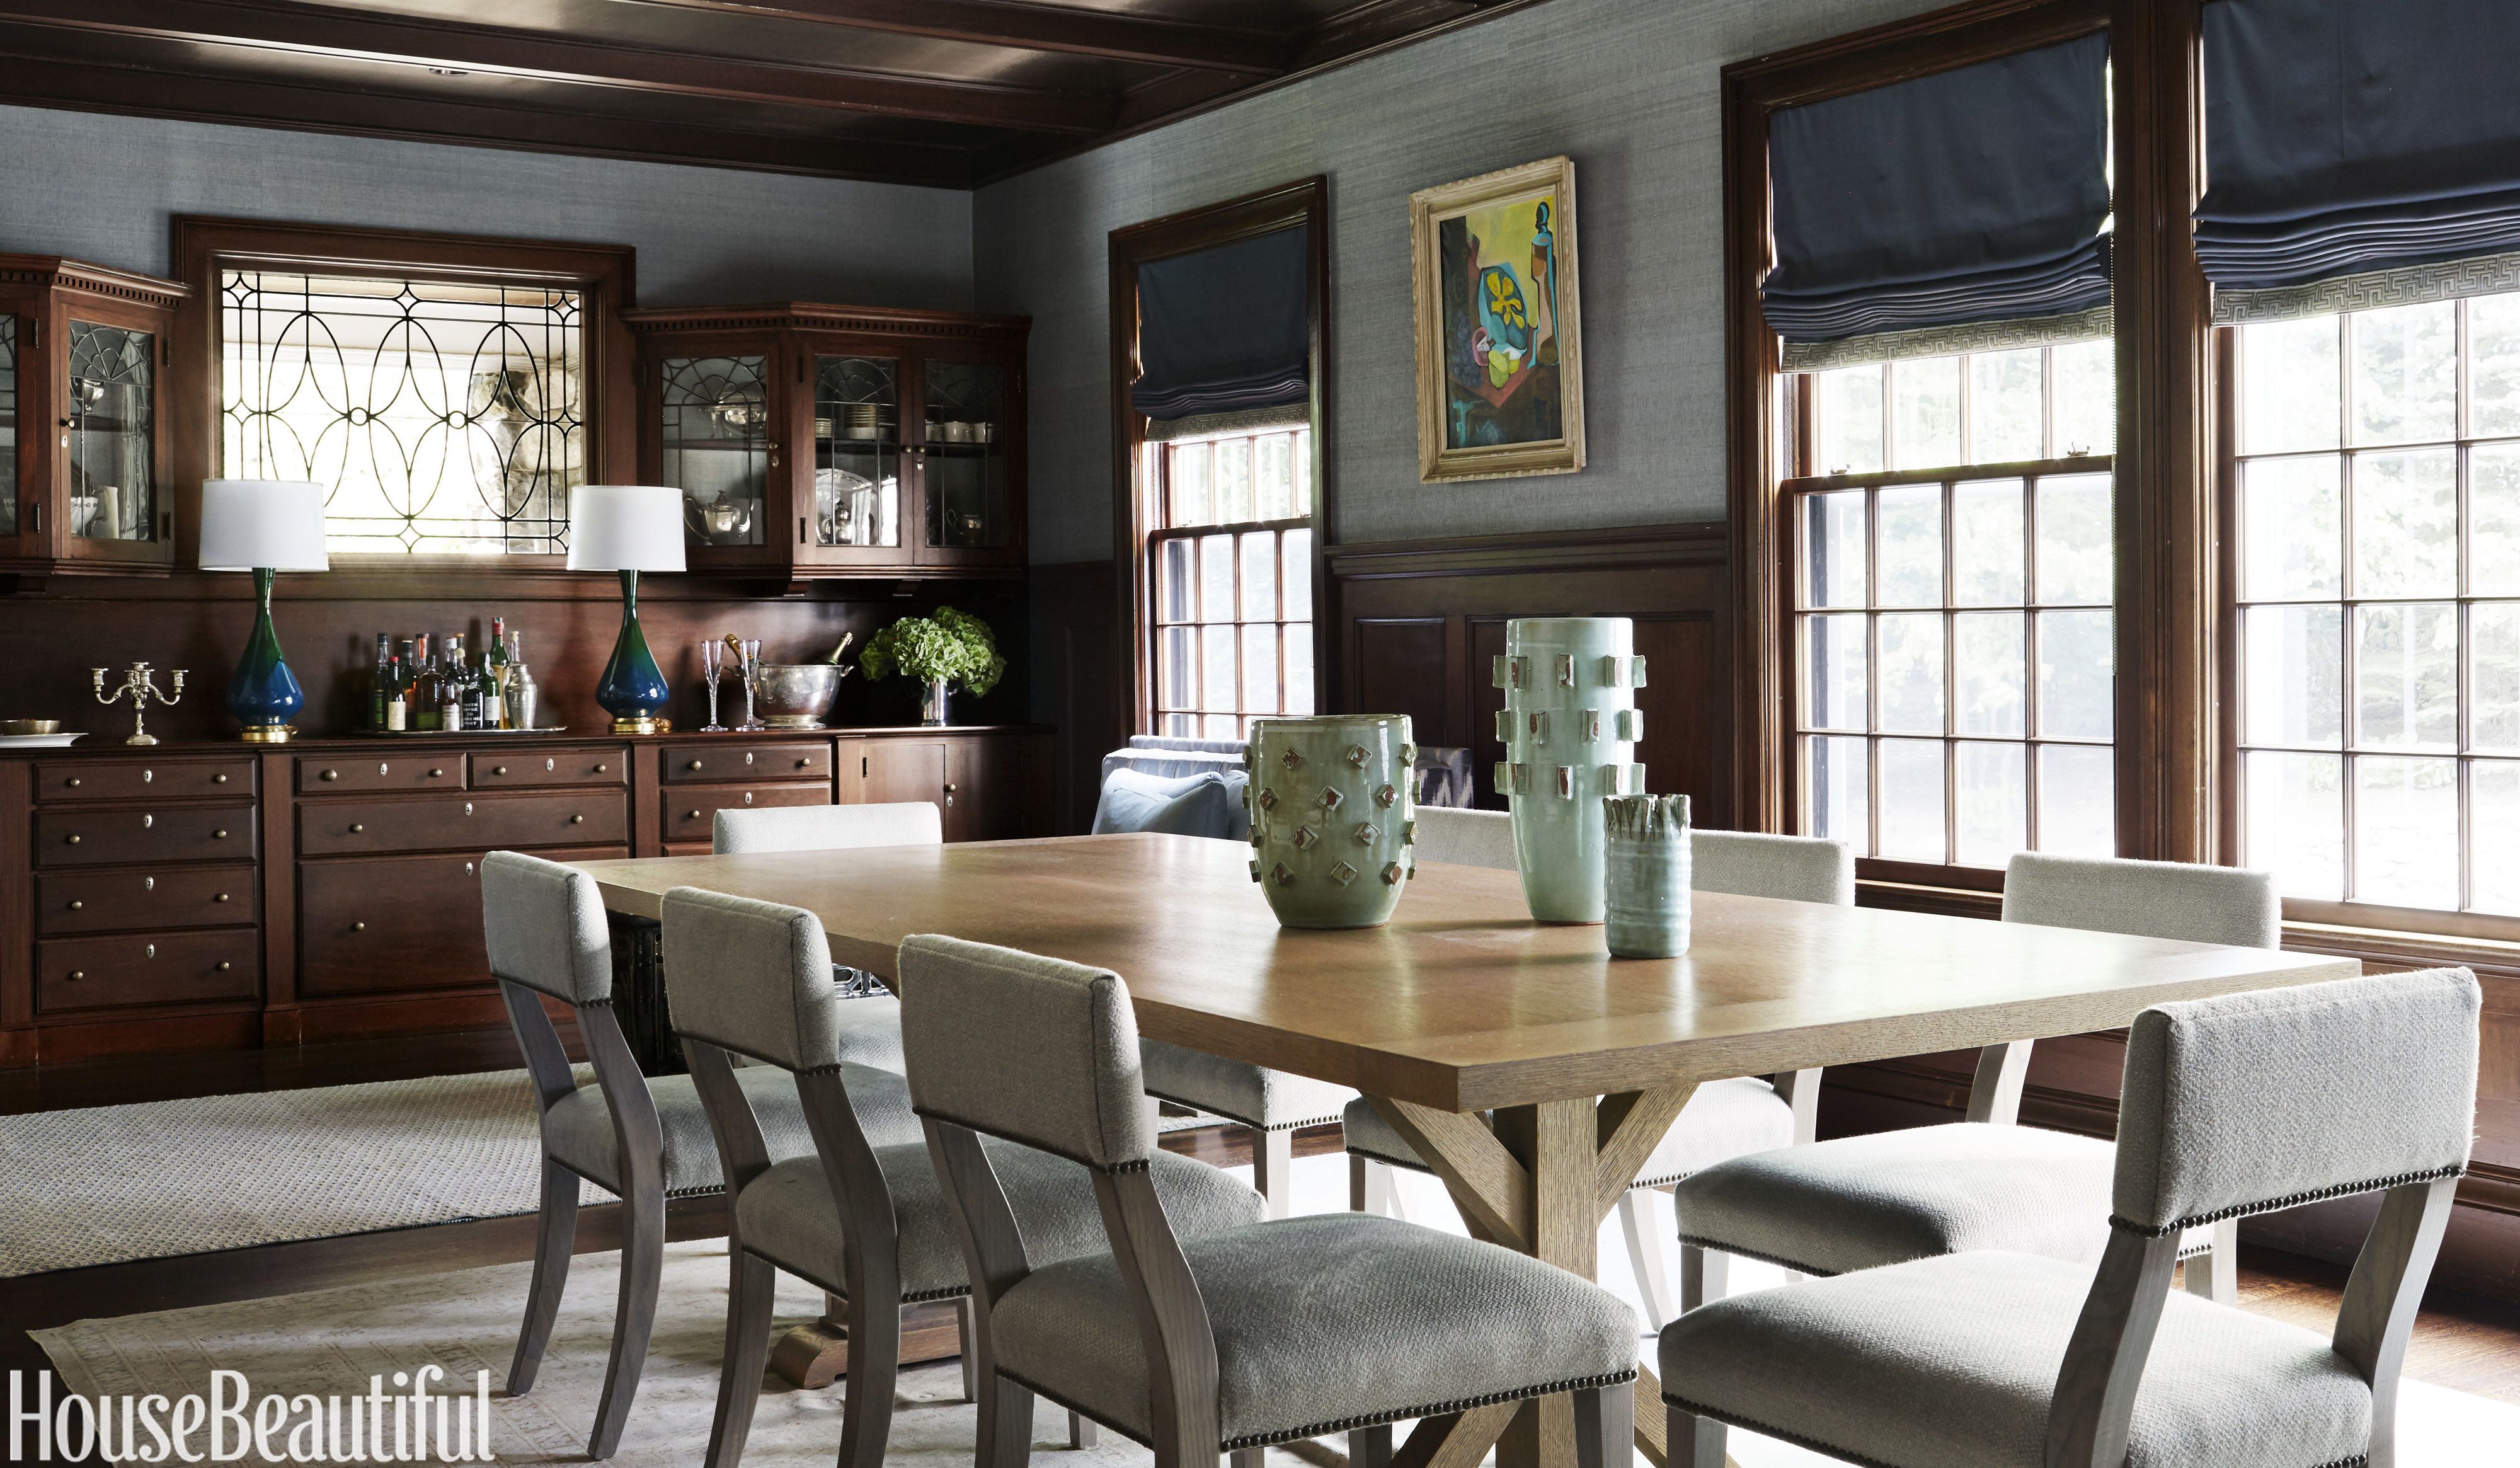 15 Rustic Dining Room Ideas Best, Rustic Wood Dining Room Table And Chairs